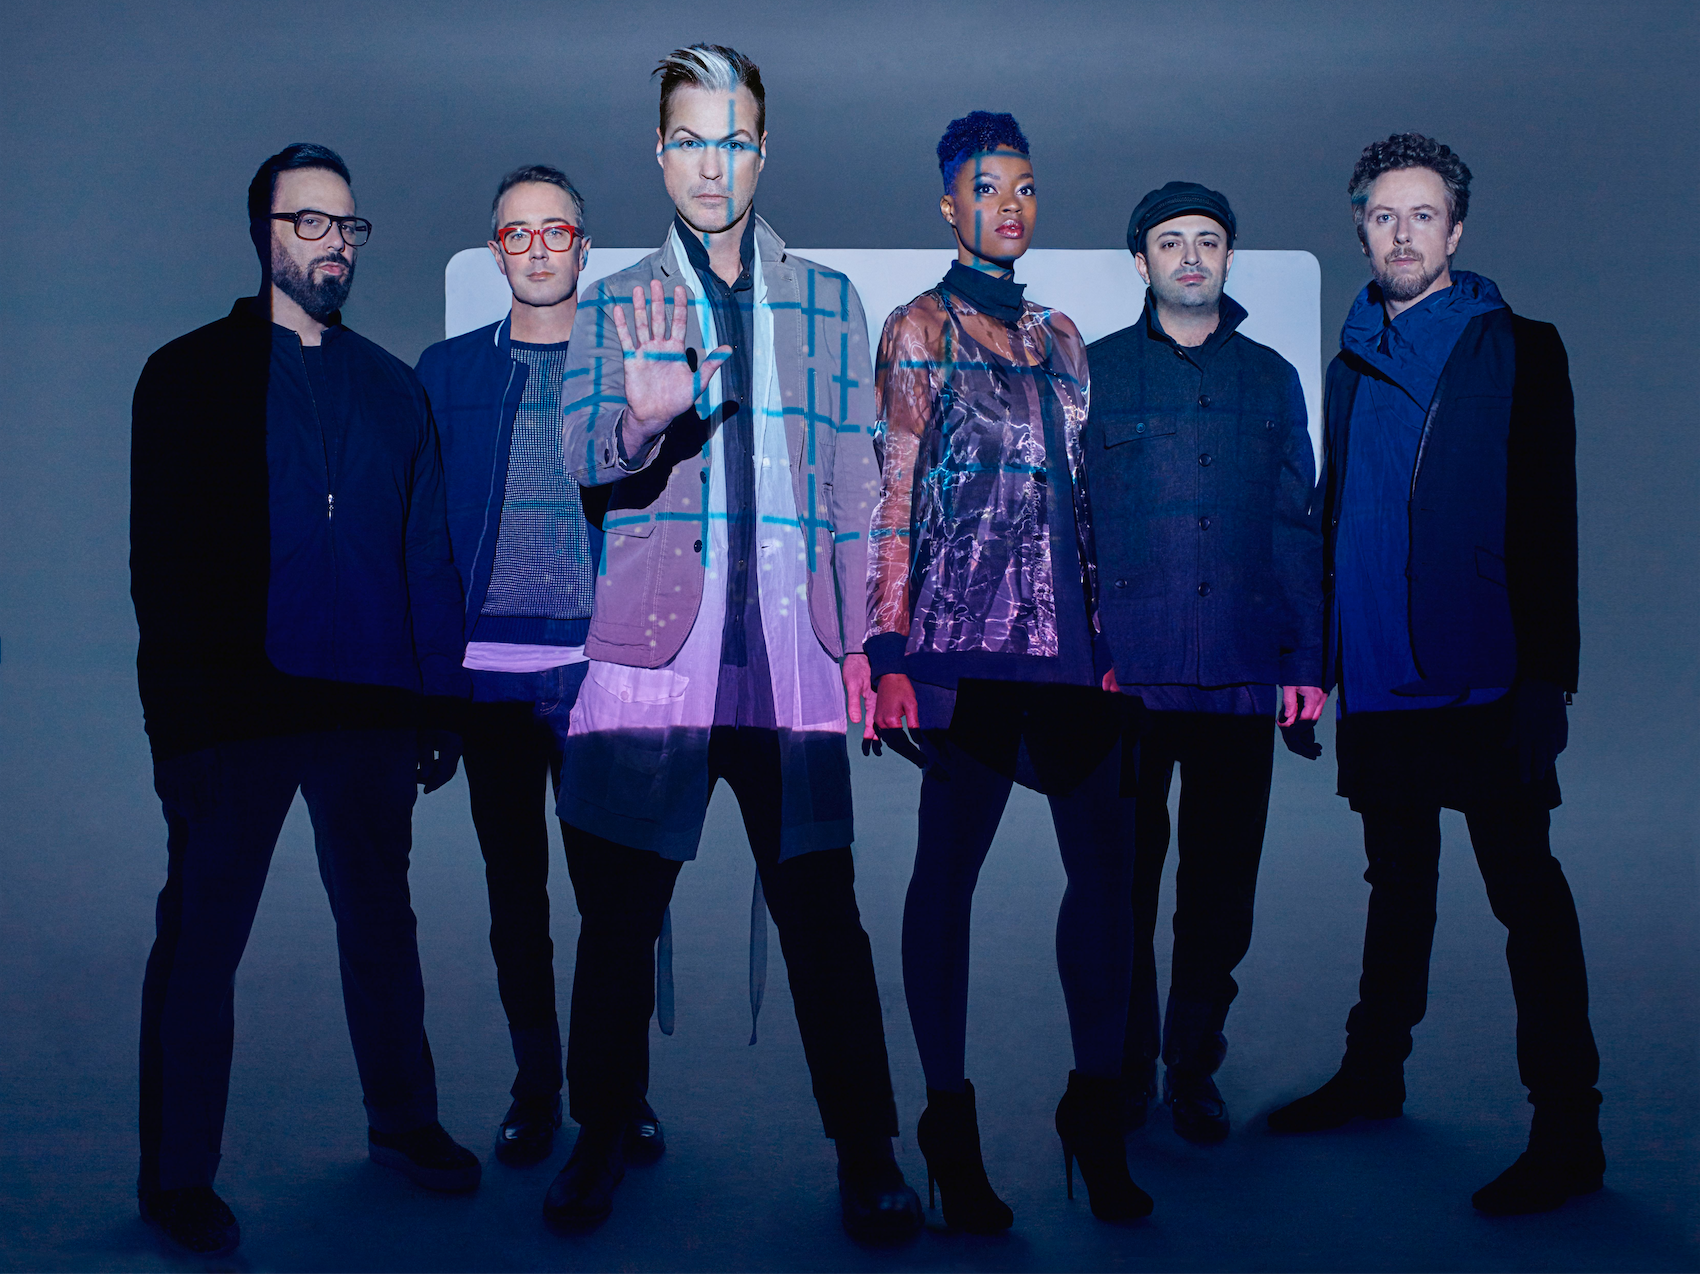 Fitz and The Tantrums Deserves A “HandClap” For Their Latest Visual